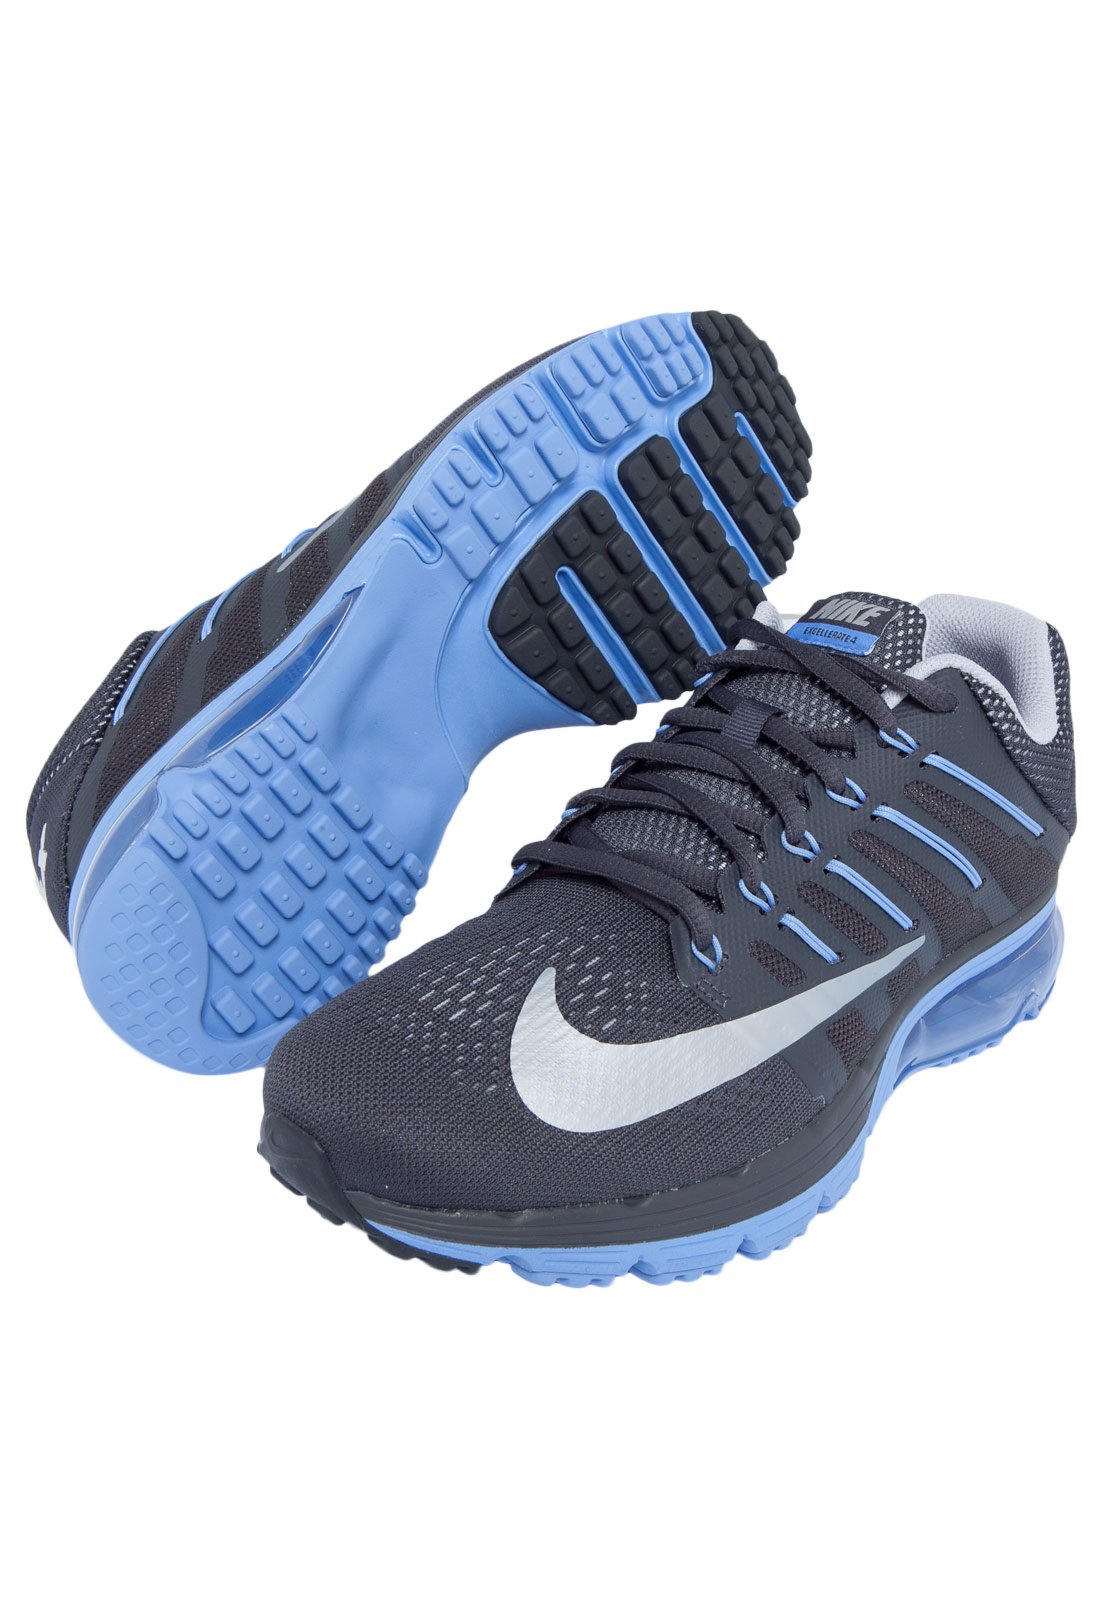 nike air max excellerate 4 masculino